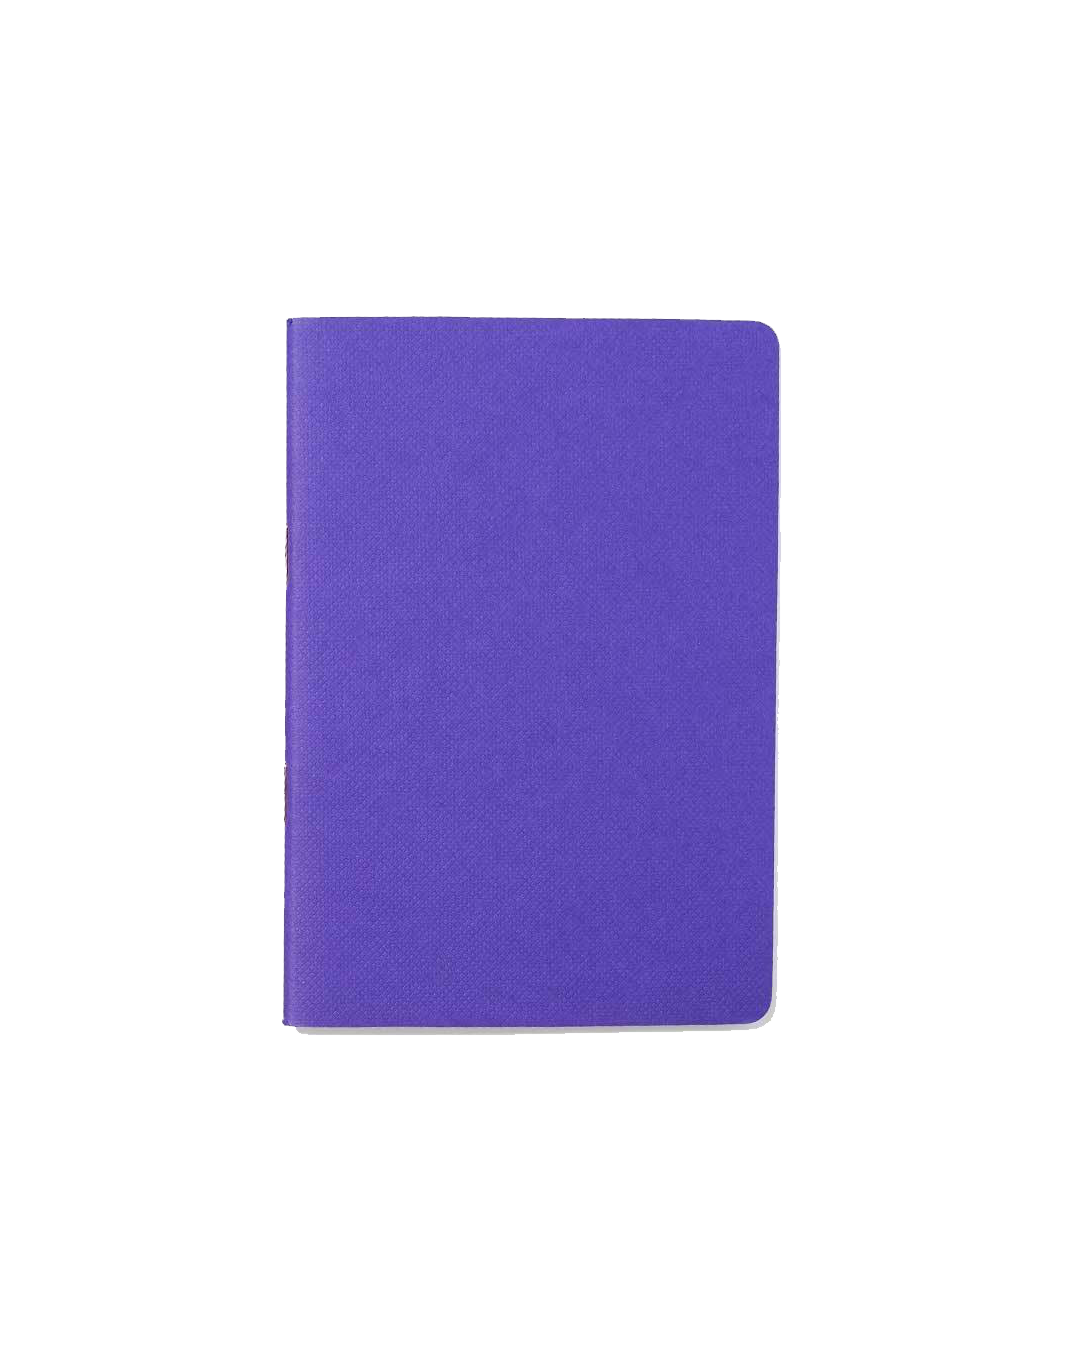 Notebook_Paper_a6-13.png